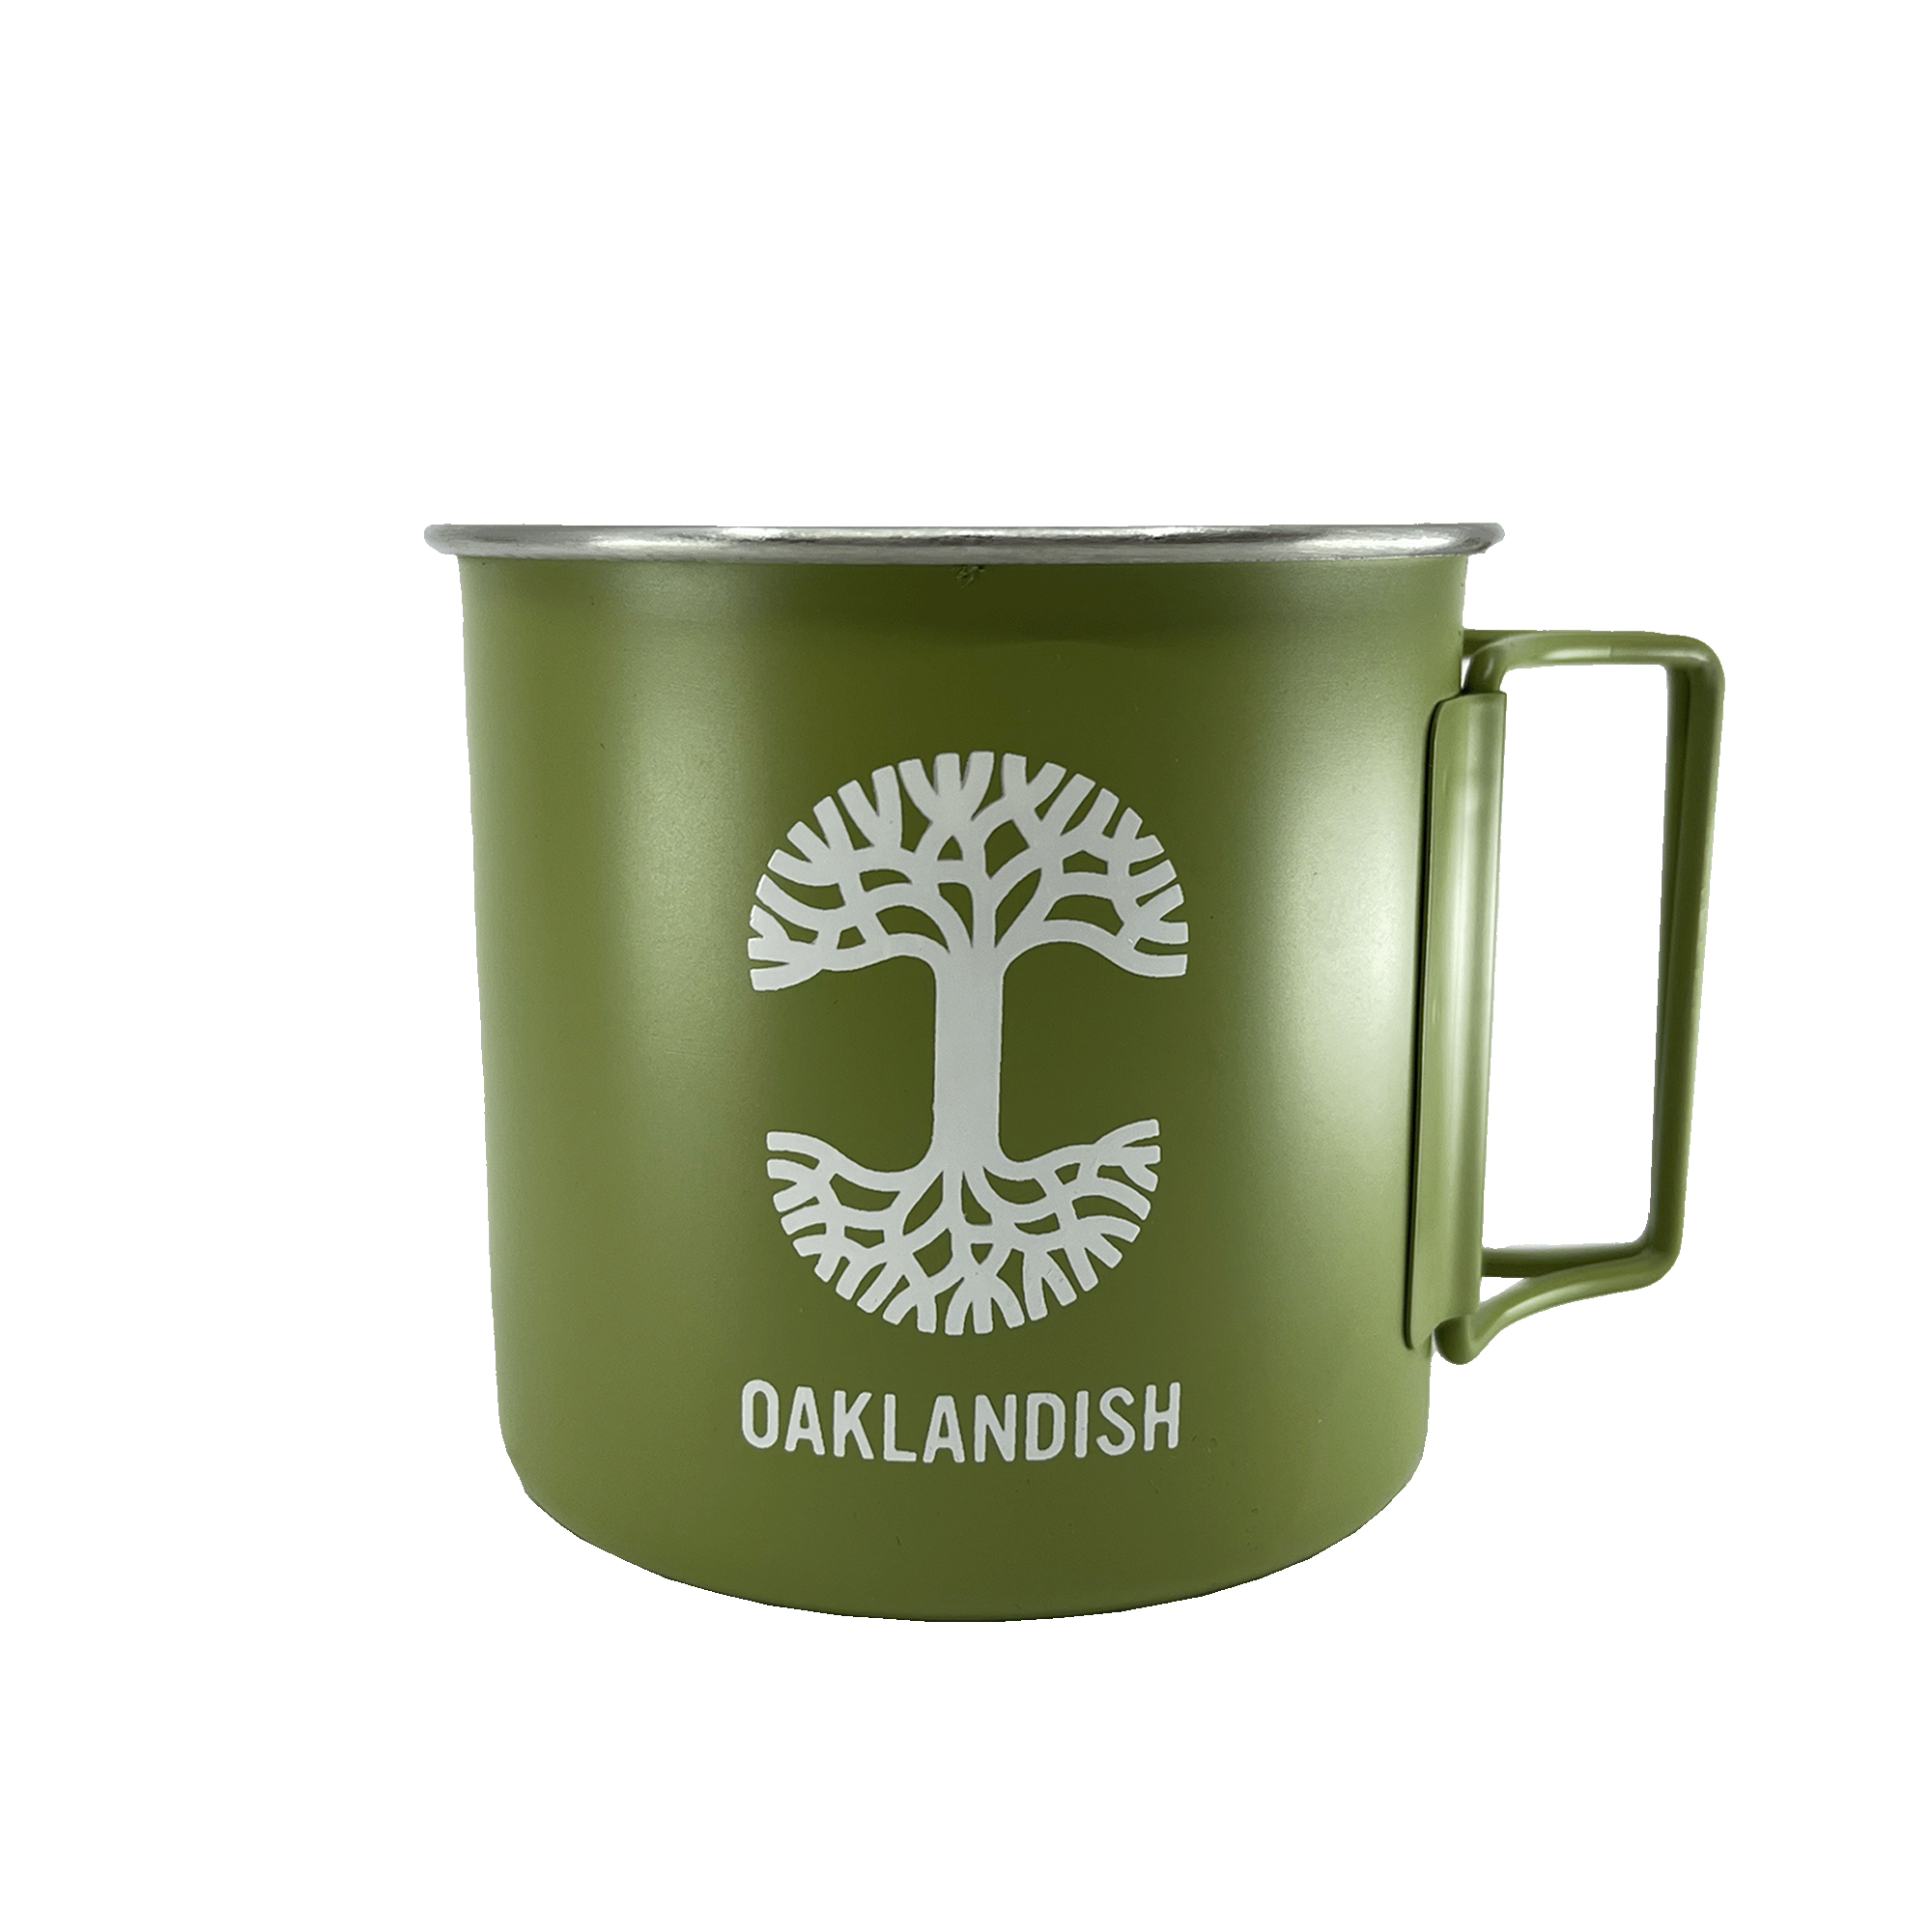 Green stainless steel camp mug with open collapsable handles, large white Oaklandish tree logo, and wordmark.